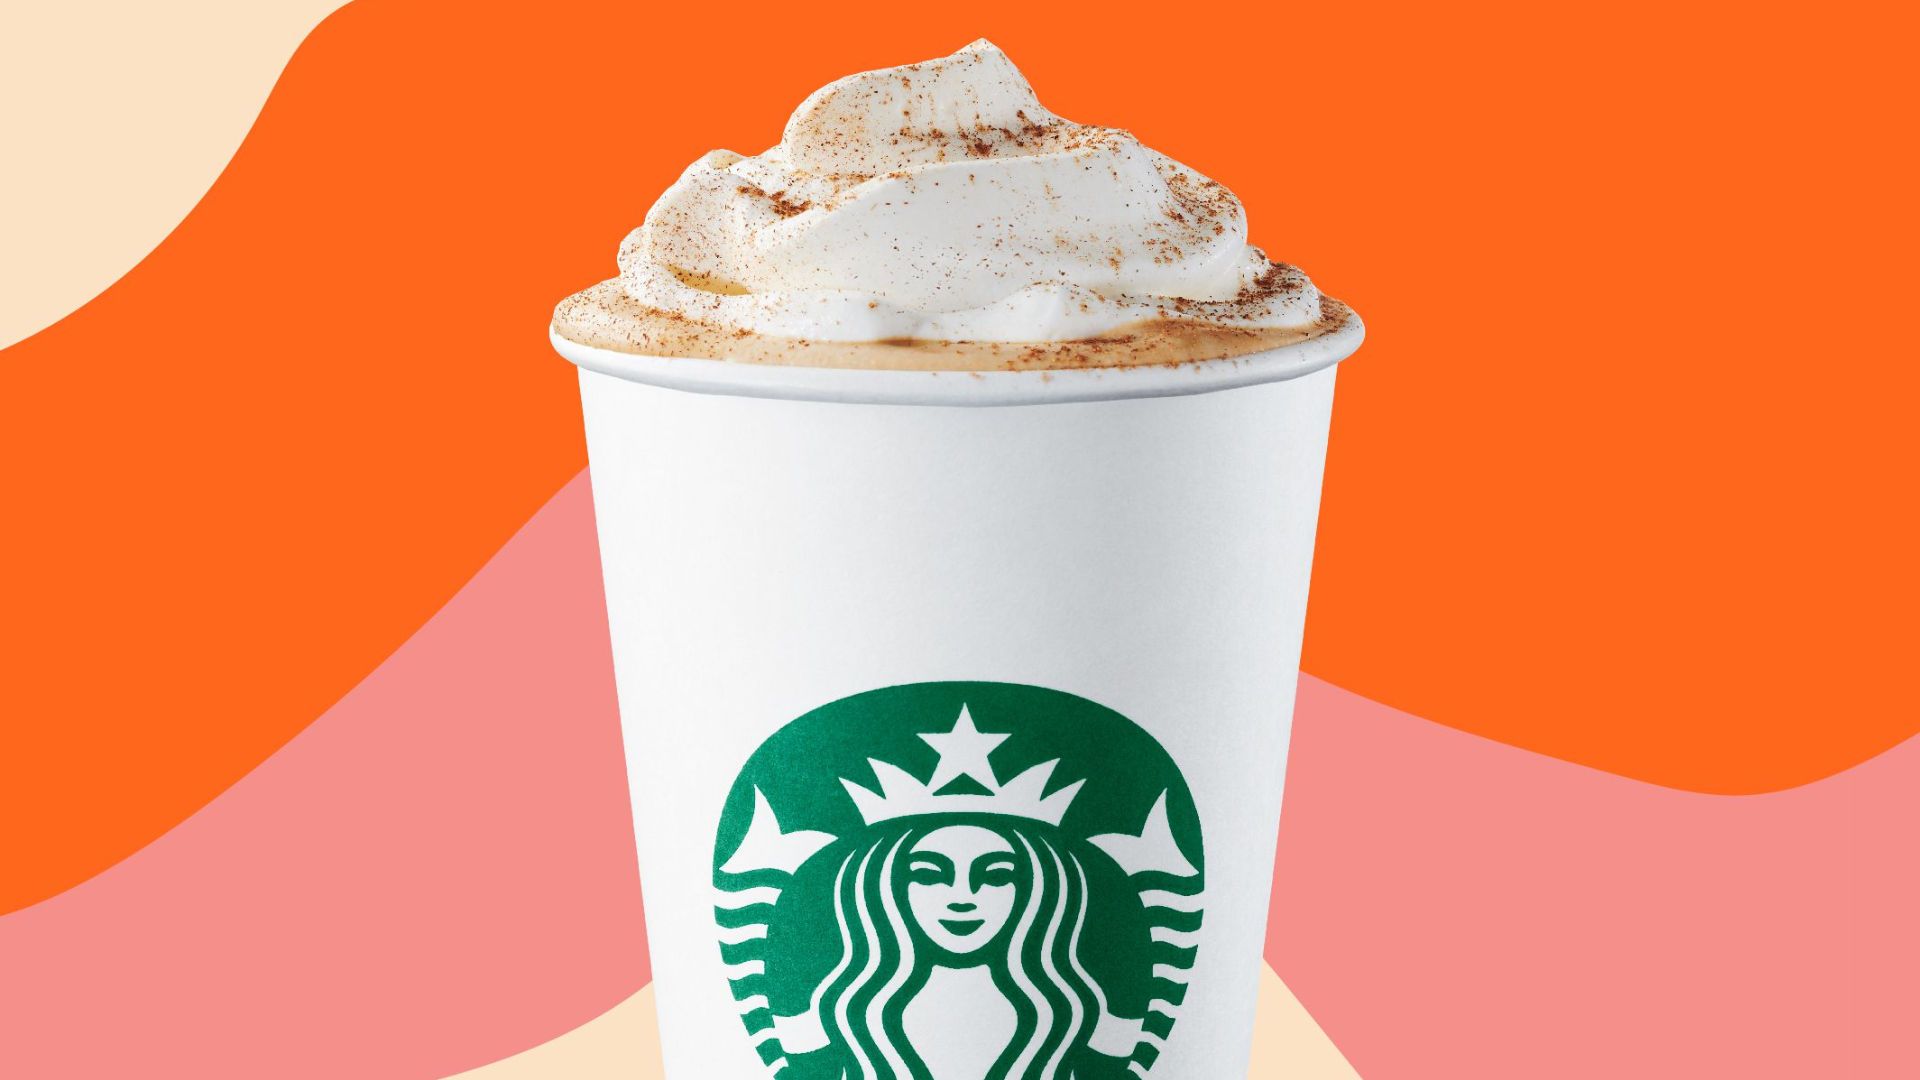 Pumpkin Spice Latte: Starbucks says they will be bringing back the favorite coffee drink